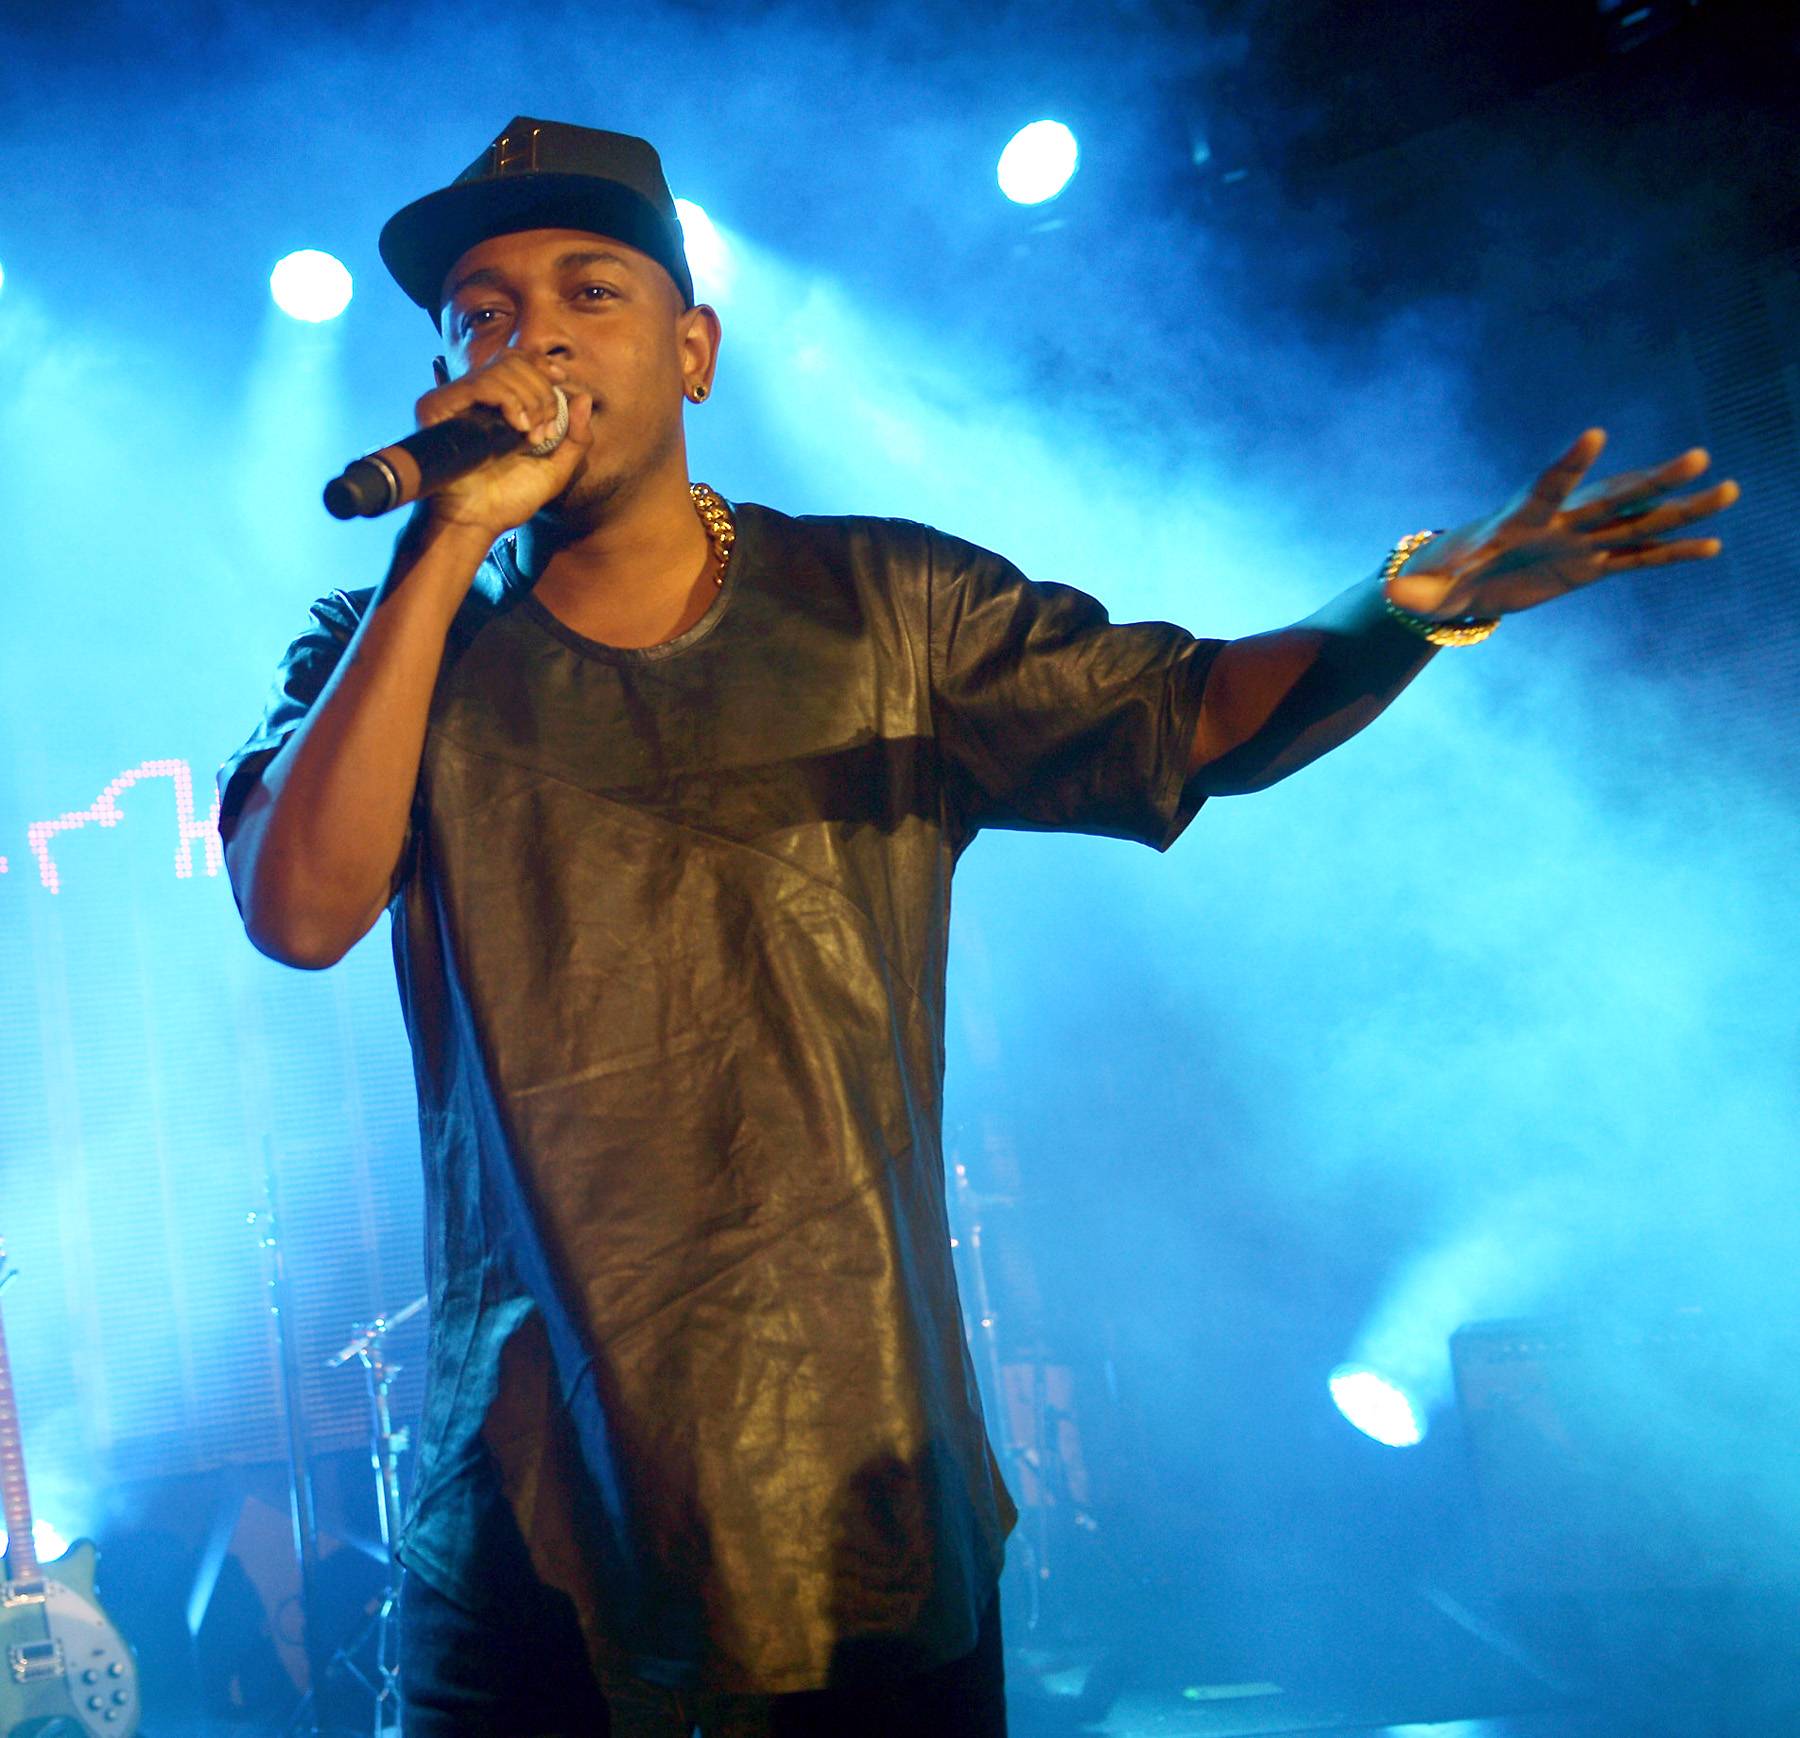 Kendrick Lamar in Columbus: What you need to know about concert